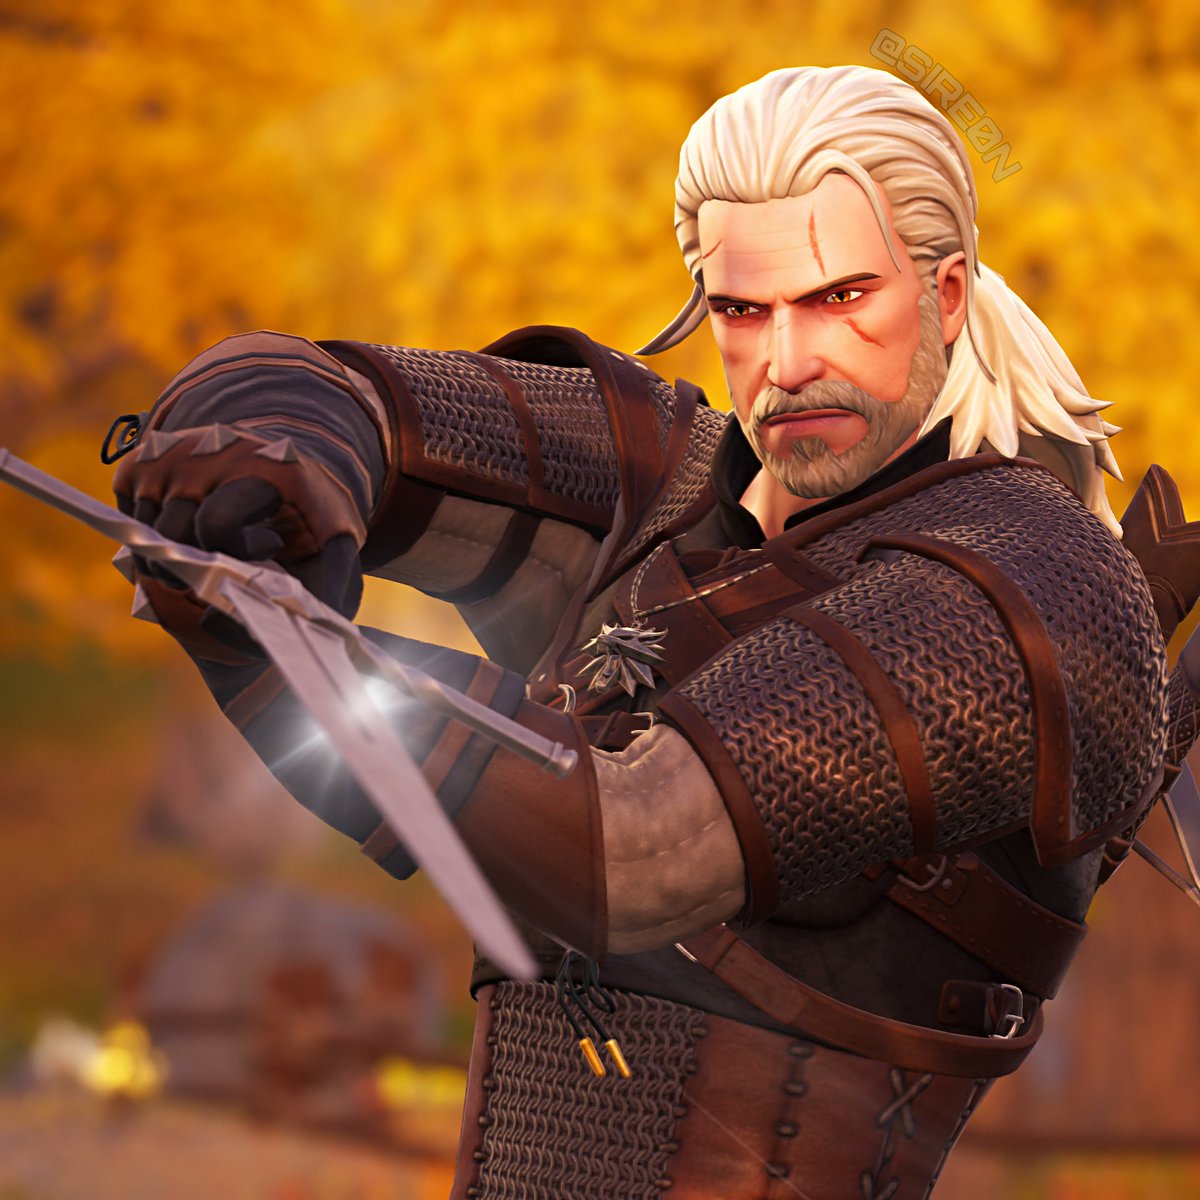 🐺Give coin to your Witcher🐺
#fortnite #fortnitechapter4 #fortniteleaks #fortniteedit  #fortniteposts  #fortnitecaptures  #fortnitecommunity #virtualphotography #geraldtherivia #thewitcher